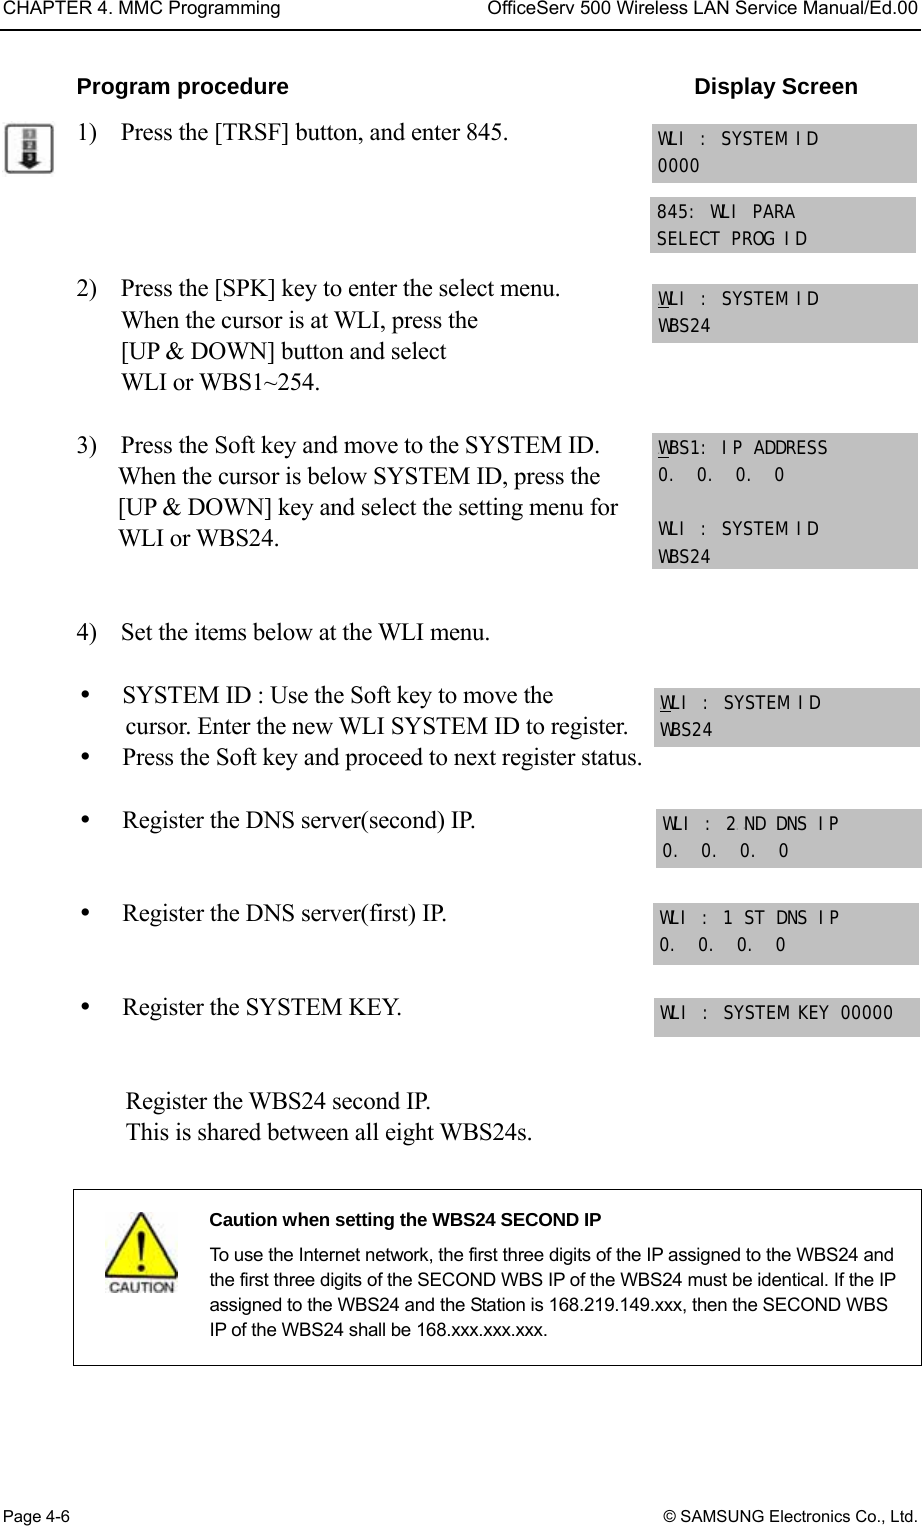 CHAPTER 4. MMC Programming  OfficeServ 500 Wireless LAN Service Manual/Ed.00 Page 4-6 © SAMSUNG Electronics Co., Ltd. Program procedure                                    Display Screen 1)    Press the [TRSF] button, and enter 845.     2)    Press the [SPK] key to enter the select menu. When the cursor is at WLI, press the   [UP &amp; DOWN] button and select   WLI or WBS1~254.  3)    Press the Soft key and move to the SYSTEM ID.   When the cursor is below SYSTEM ID, press the [UP &amp; DOWN] key and select the setting menu for WLI or WBS24.   4)    Set the items below at the WLI menu.    SYSTEM ID : Use the Soft key to move the cursor. Enter the new WLI SYSTEM ID to register.   Press the Soft key and proceed to next register status.      Register the DNS server(second) IP.     Register the DNS server(first) IP.     Register the SYSTEM KEY.       Register the WBS24 second IP.   This is shared between all eight WBS24s.   Caution when setting the WBS24 SECOND IP   To use the Internet network, the first three digits of the IP assigned to the WBS24 and the first three digits of the SECOND WBS IP of the WBS24 must be identical. If the IP assigned to the WBS24 and the Station is 168.219.149.xxx, then the SECOND WBS IP of the WBS24 shall be 168.xxx.xxx.xxx.  845: WLI PARA SELECT PROG ID UWULI : SYSTEM ID WBS24 UWUBS1: IP ADDRESS 0.  0.  0.  0  WLI : SYSTEM ID WBS24 WLI : SYSTEM ID 0000 UWULI : SYSTEM ID WBS24 WLI : 2P PND DNS IP 0.  0.  0.  0 WLI : 1 ST DNS IP 0.  0.  0.  0  WLI : SYSTEM KEY 00000  